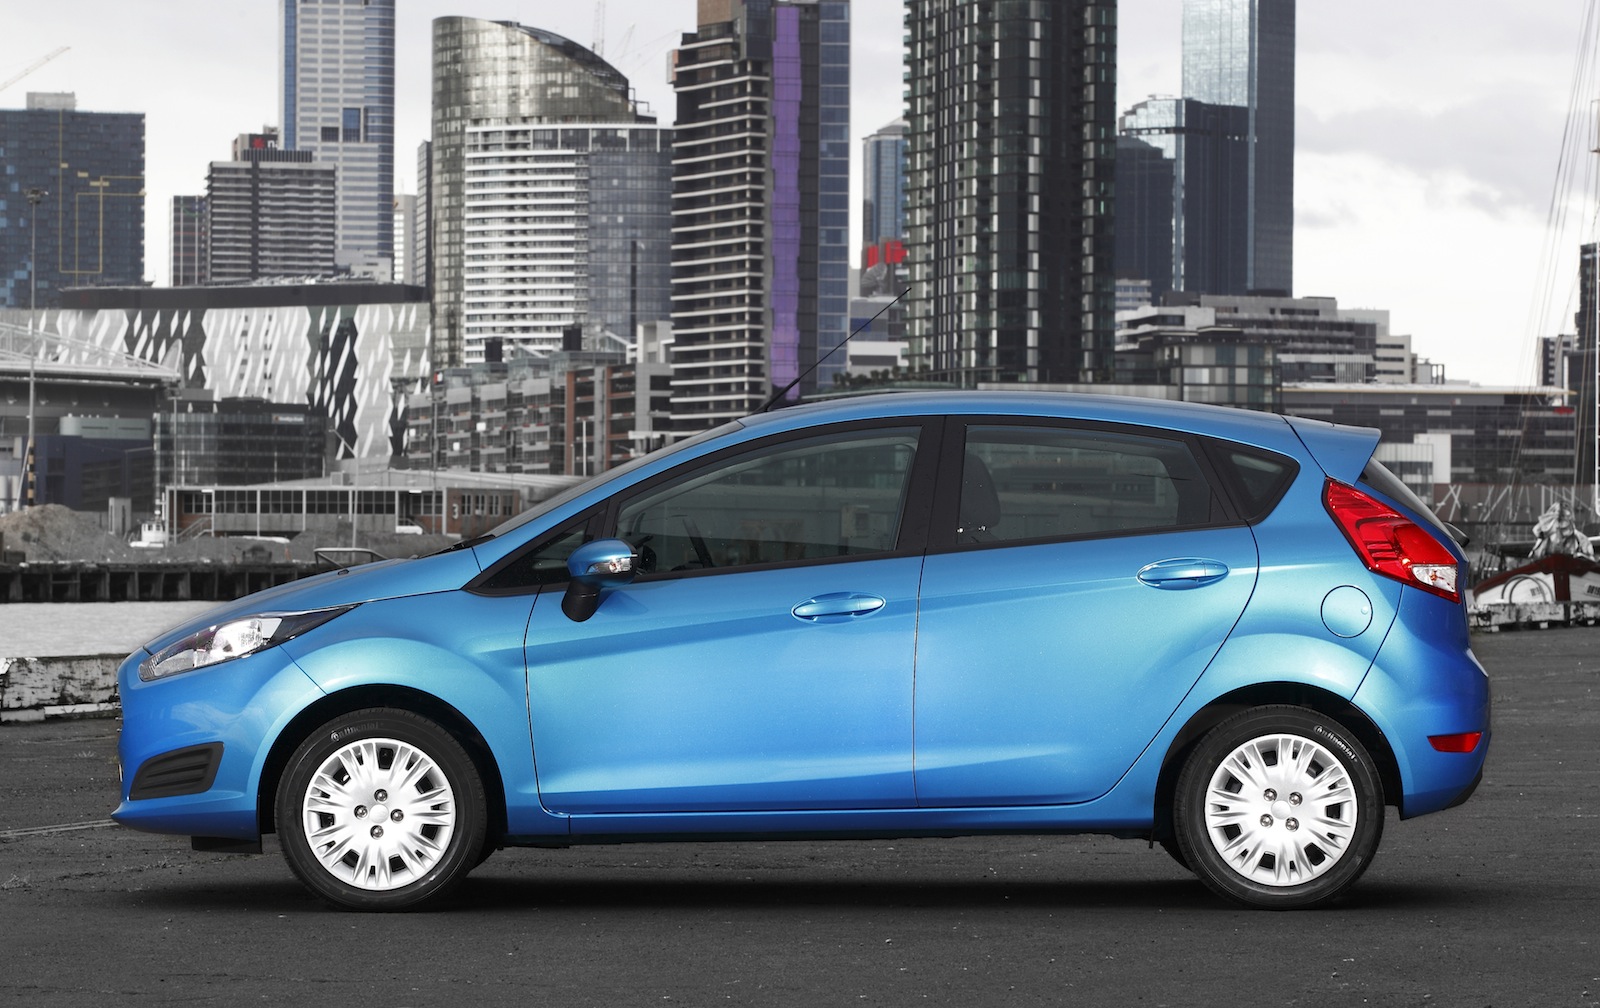 2013 Ford Fiesta Review | CarAdvice